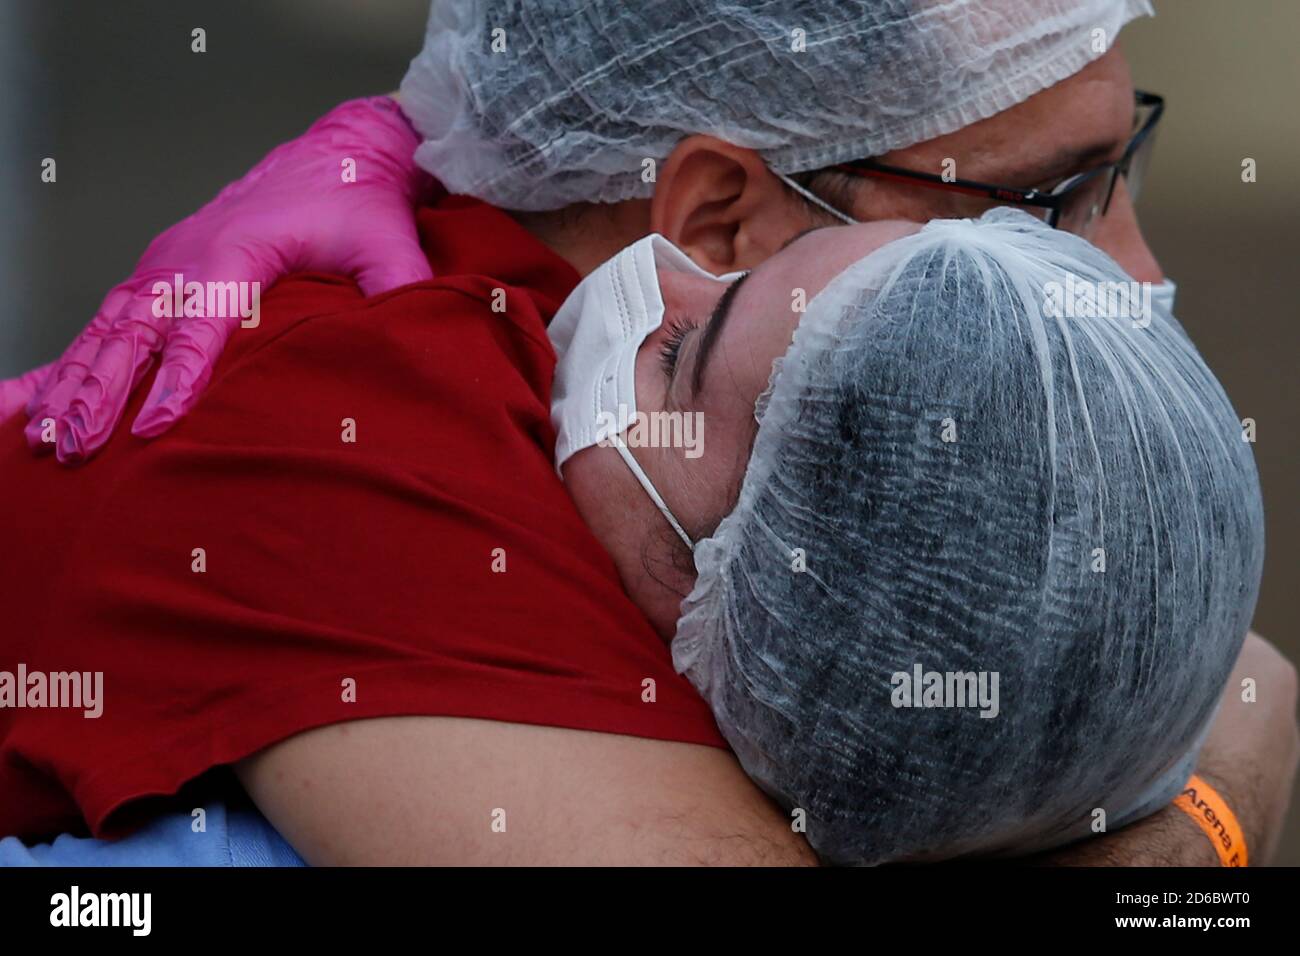 Brasilia, Brazil. 15th Oct, 2020. Health workers hug each other to celebrate the closure of a temporary hospital at the National Stadium in Brasilia, Brazil, Oct. 15, 2020. The temporary hospital is closed on Thursday. Since its establishment on May. 22, the hospital has received more than 1,800 COVID-19 patients. Credit: Lucio Tavora/Xinhua/Alamy Live News Stock Photo